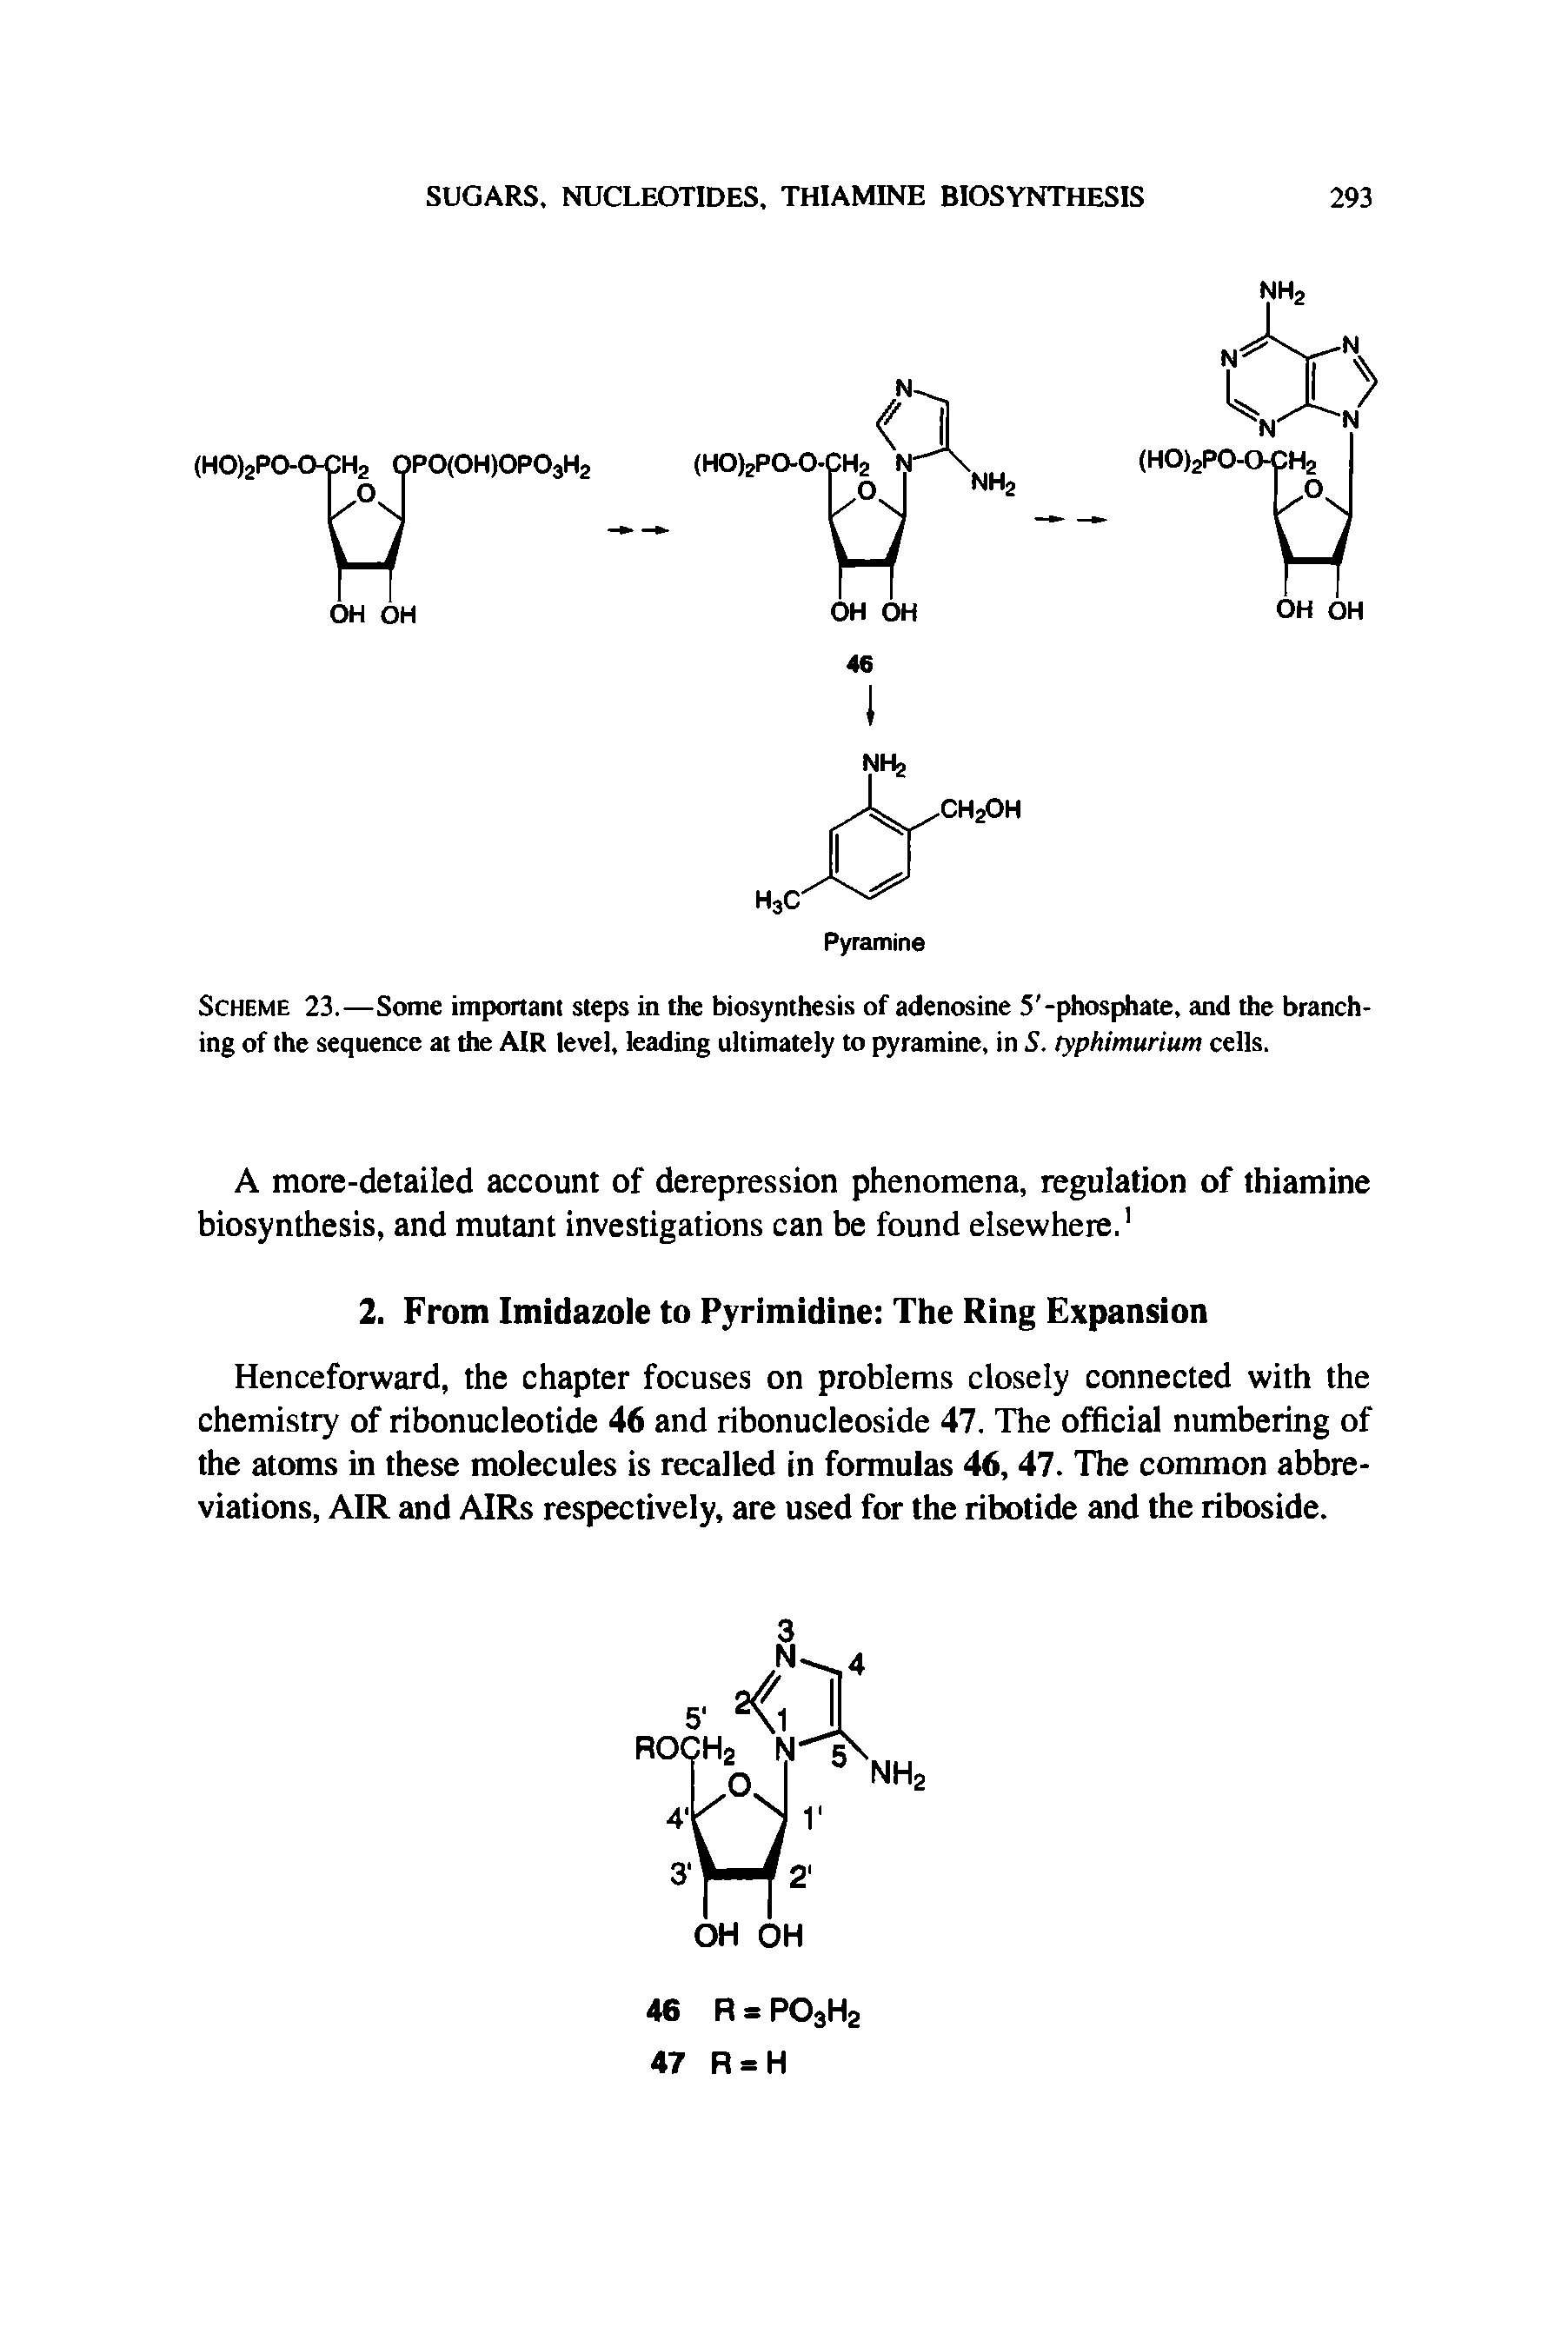 Scheme 23.—Some important steps in the biosynthesis of adenosine 5 -phosphate, and the branching of the sequence at the AIR level, leading ultimately to pyramine, in S. ryphimurium cells.